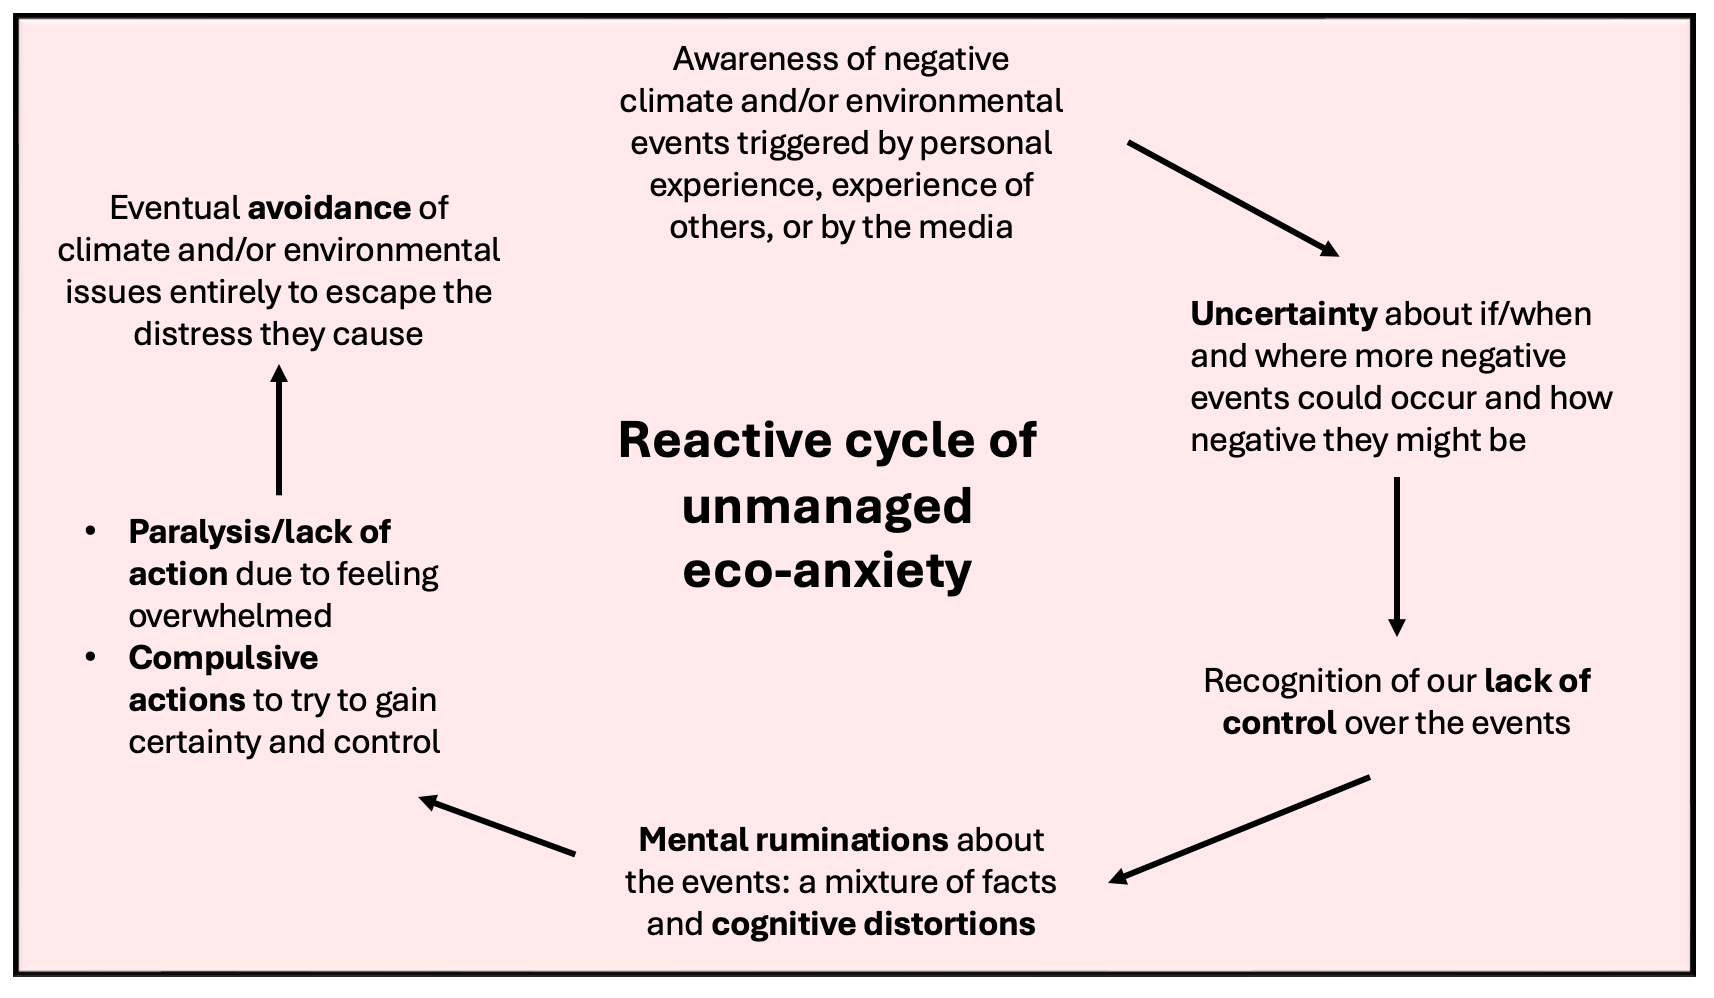 Reactive cycle of unmanaged eco-anxiety or climate anxiety 